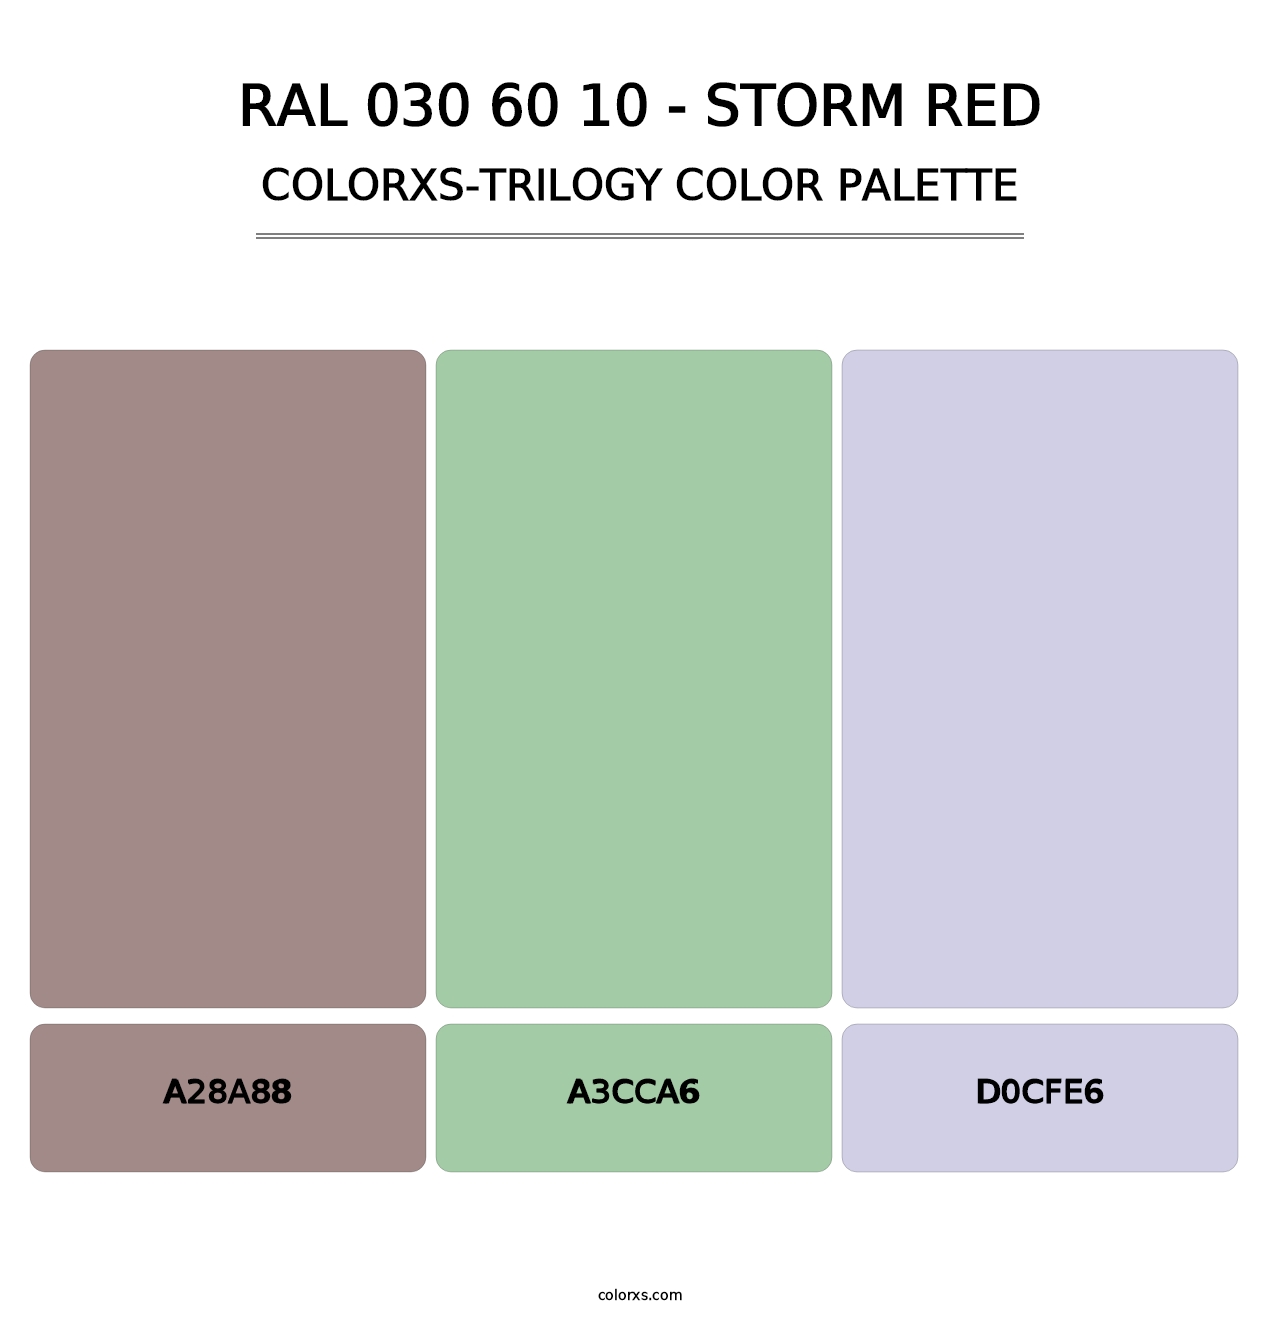 RAL 030 60 10 - Storm Red - Colorxs Trilogy Palette